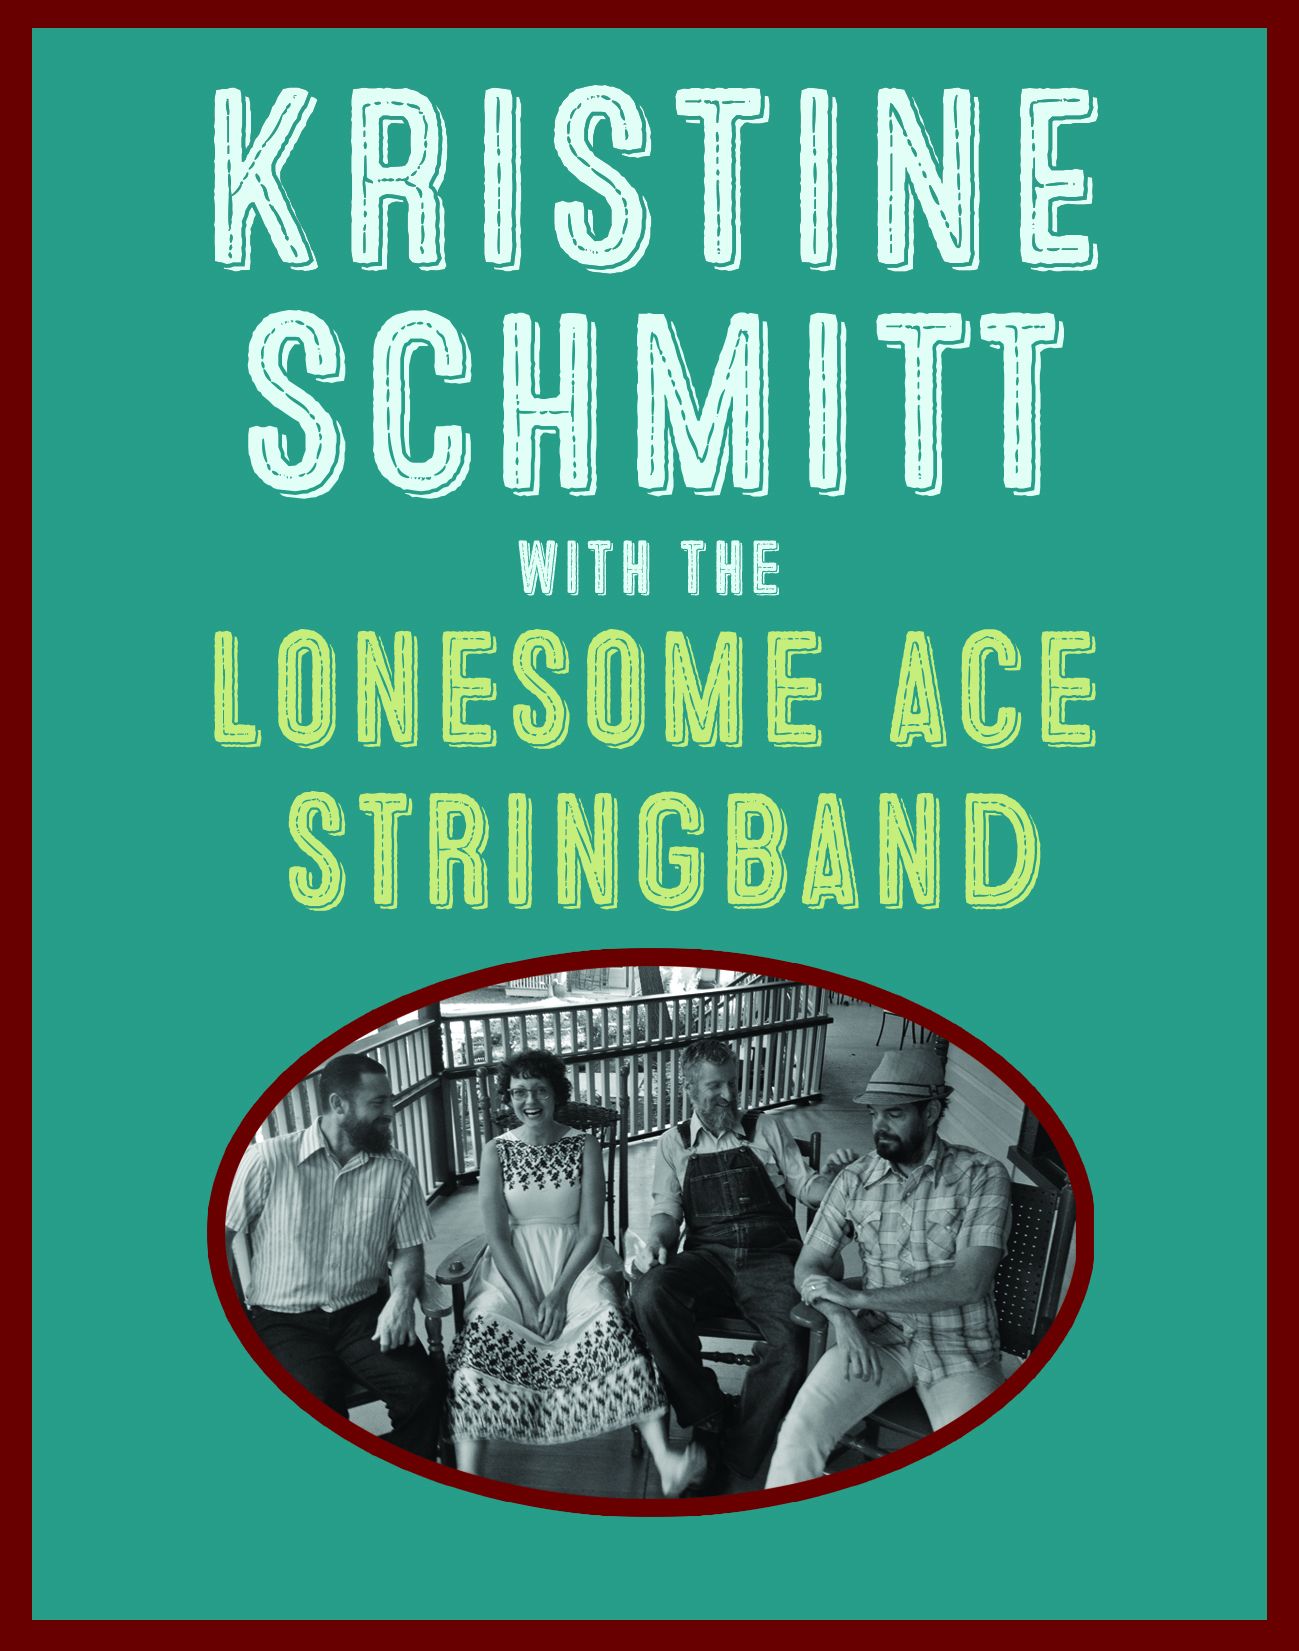 Kristine Schmitt with the Lonesome Ace Stringband